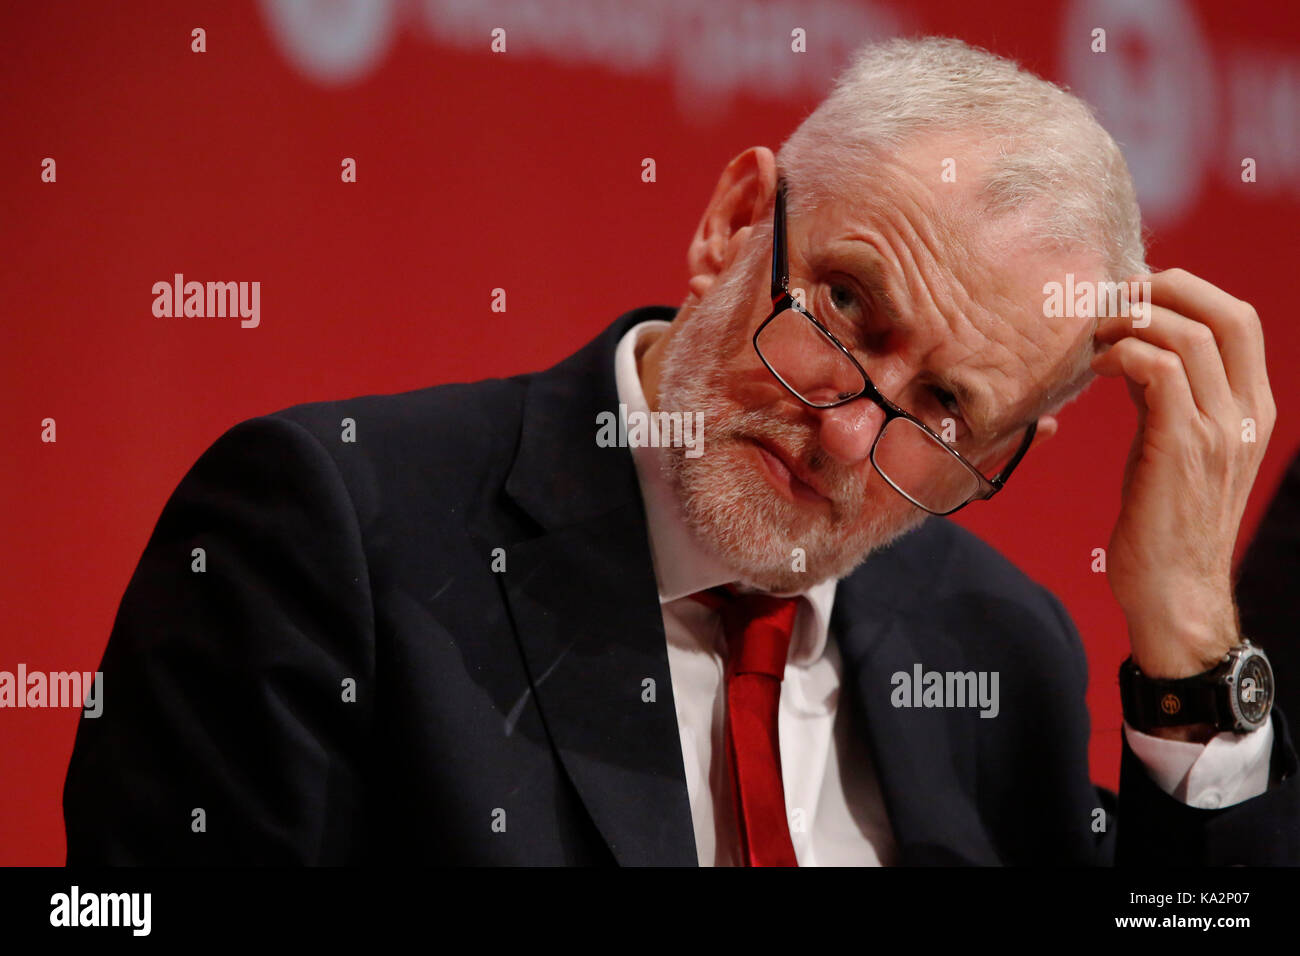 Brighton, UK. 24th September, 2017. Jeremy Corbyn, leader of Britain's opposition Labour party touches his head during the annual Labour Party Conference in Brighton, UK Sunday, September 24, 2017. Photograph : Credit: Luke MacGregor/Alamy Live News Stock Photo